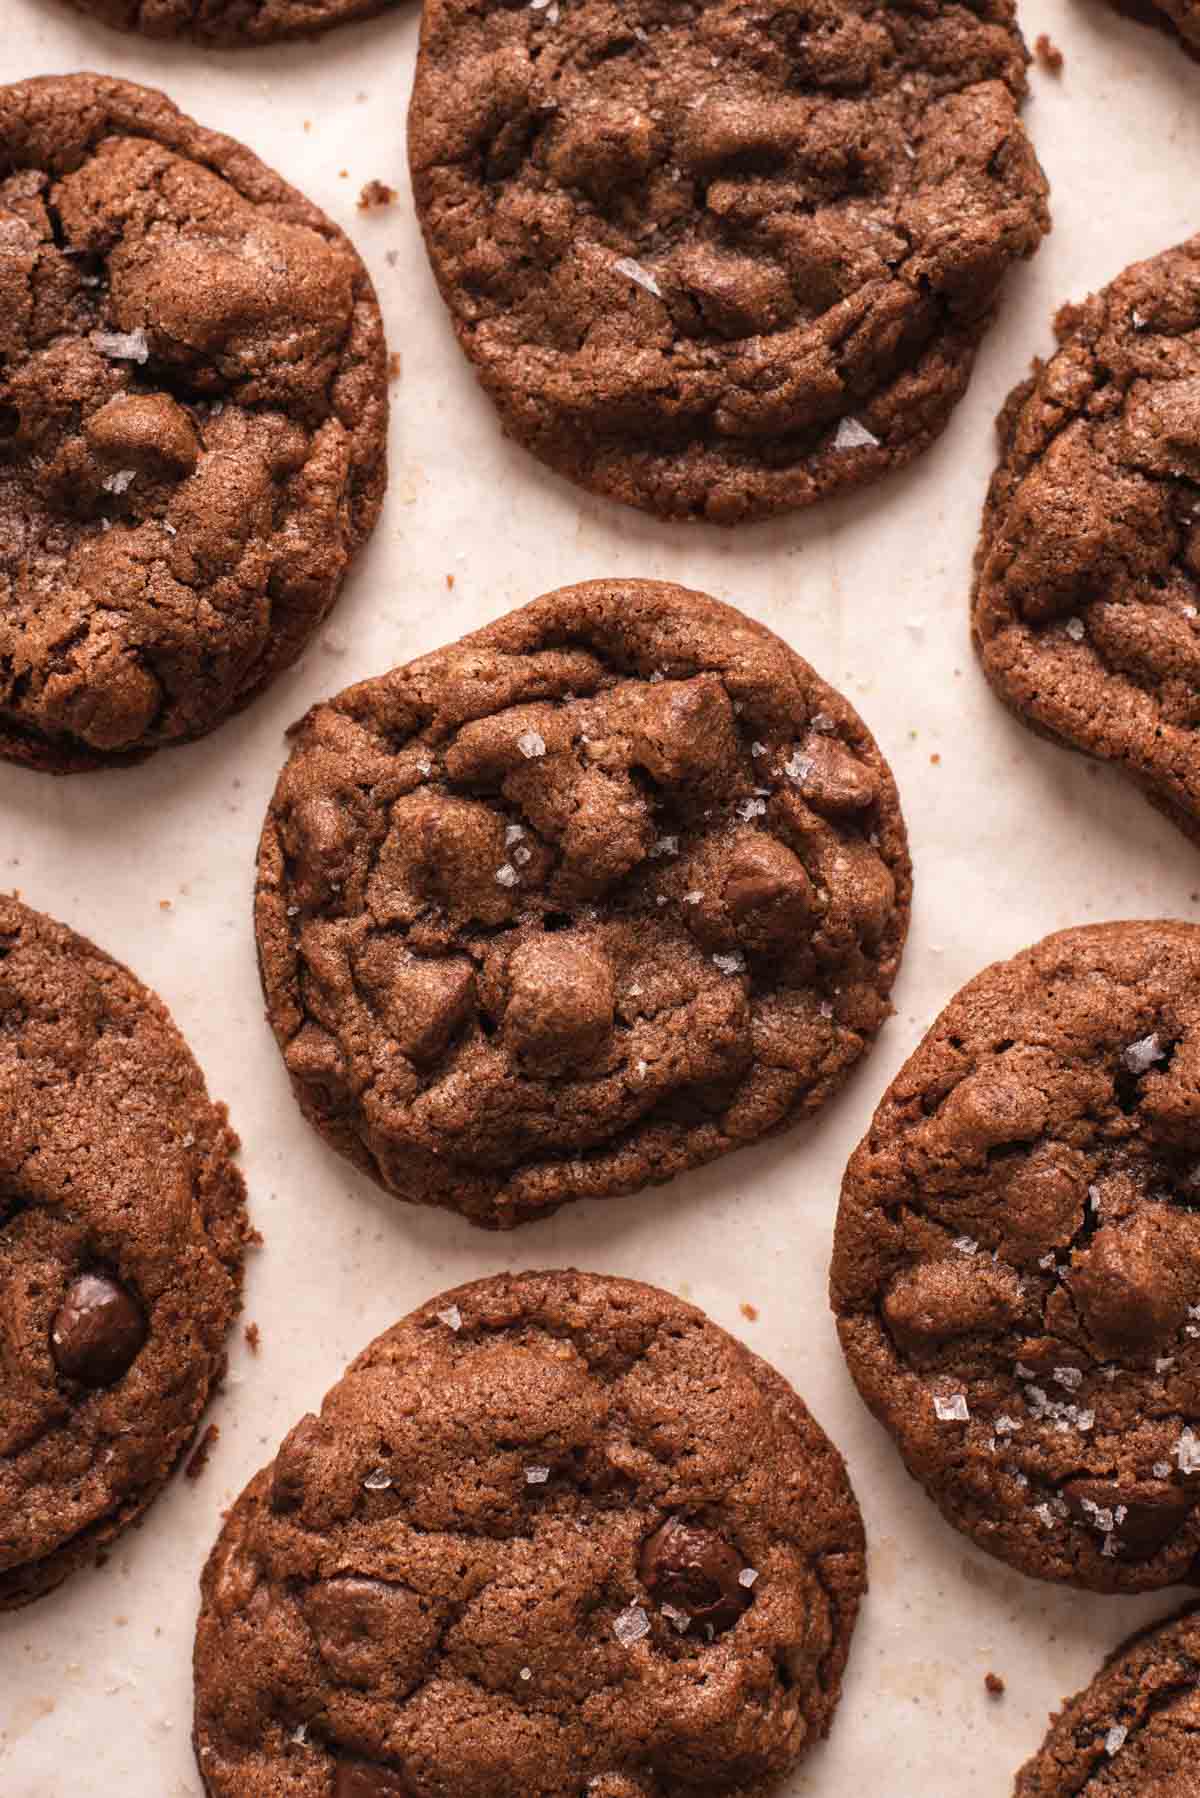 Overhead view of round chocolate cookies on a white background